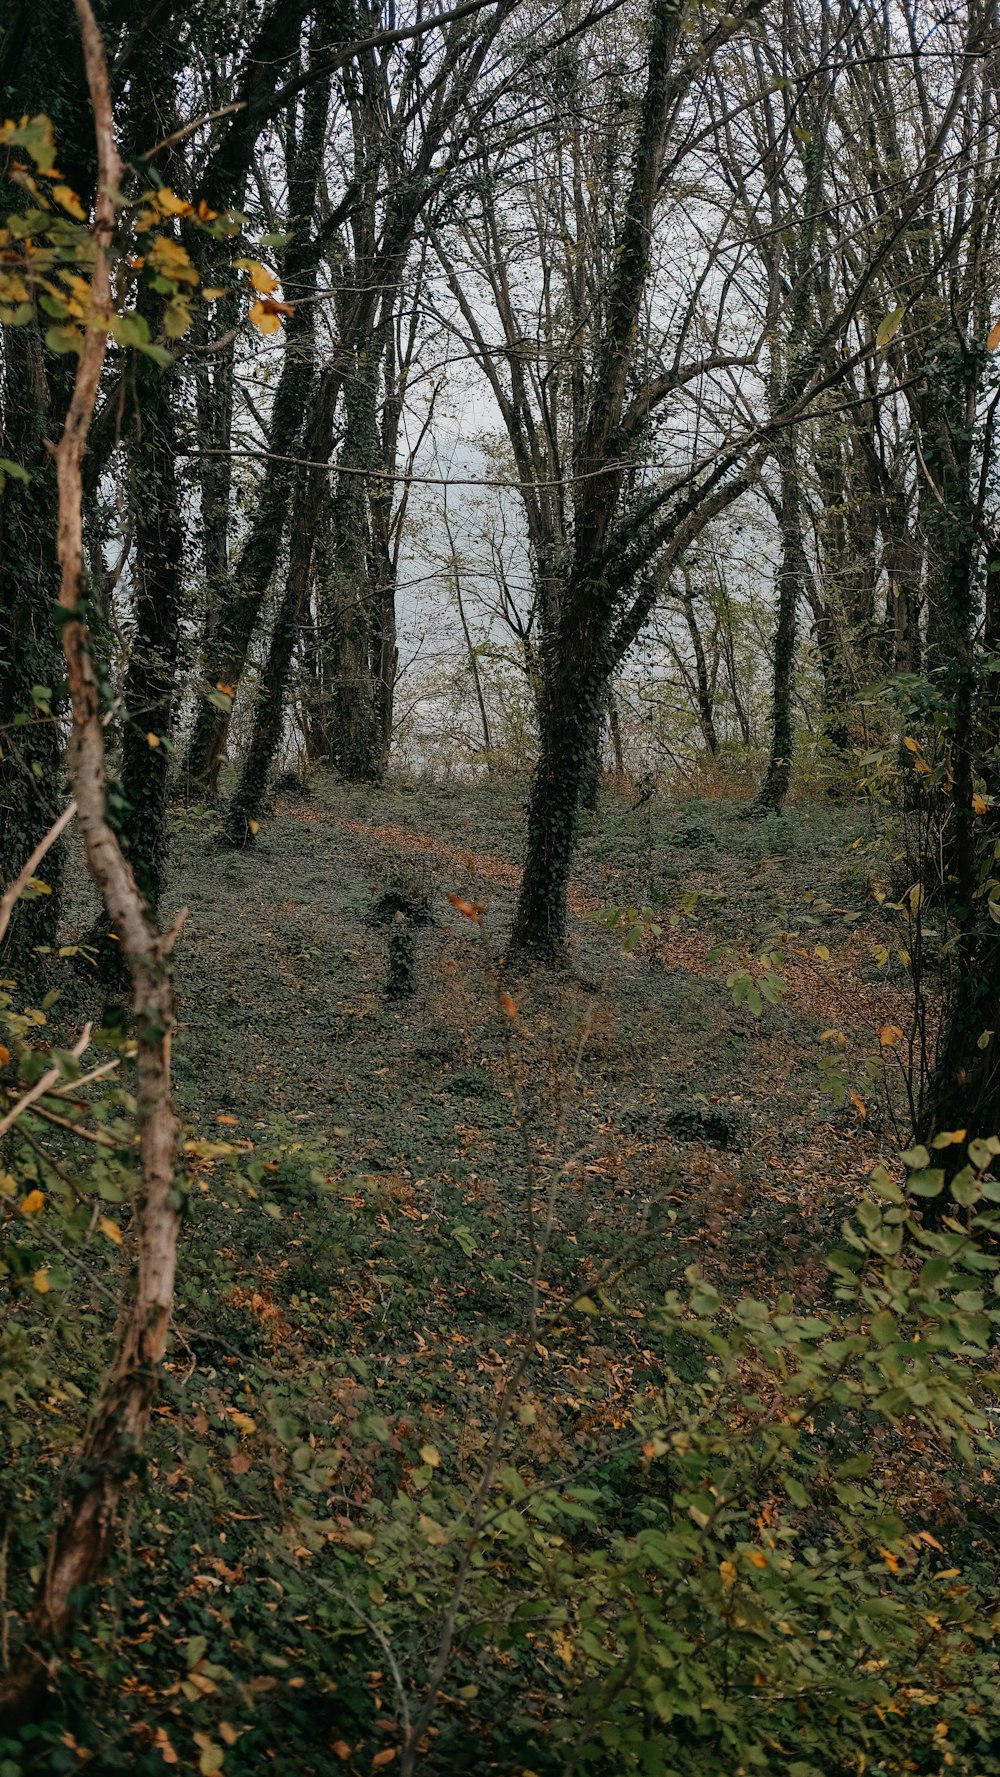 a person walking through a forest filled with trees